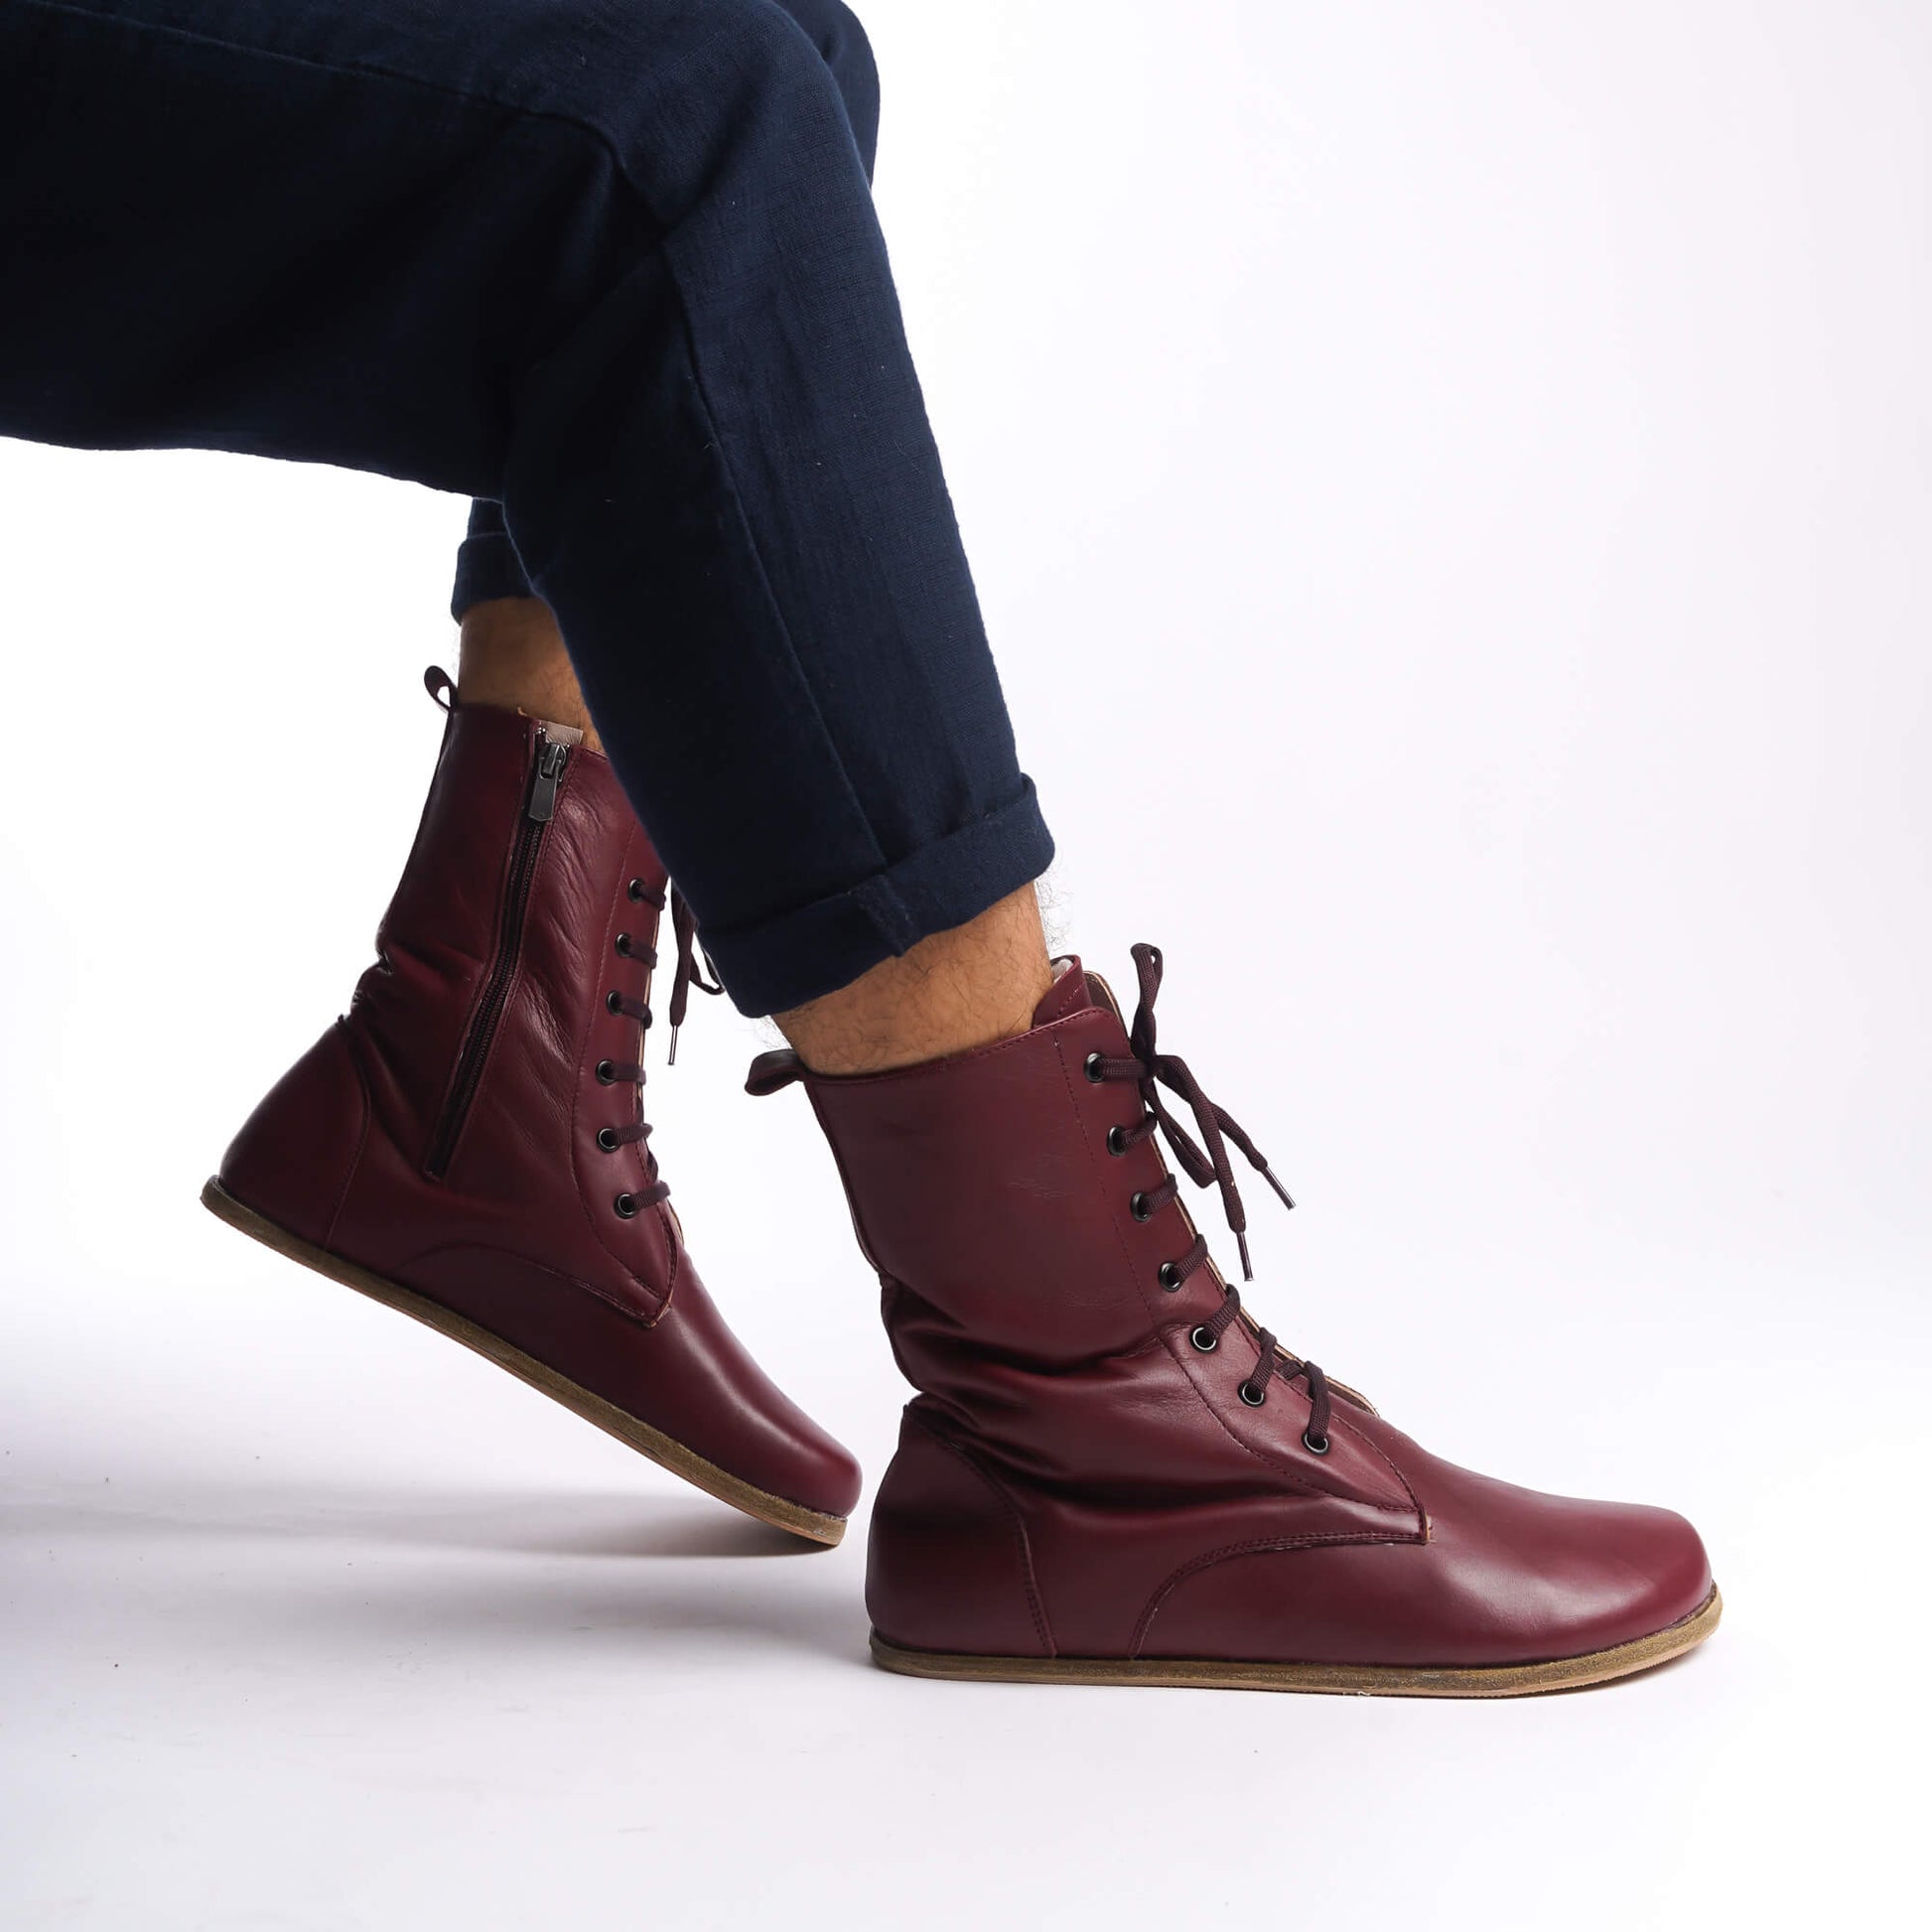 Men's burgundy genuine leather barefoot winter boots, featuring laces and a side zipper.